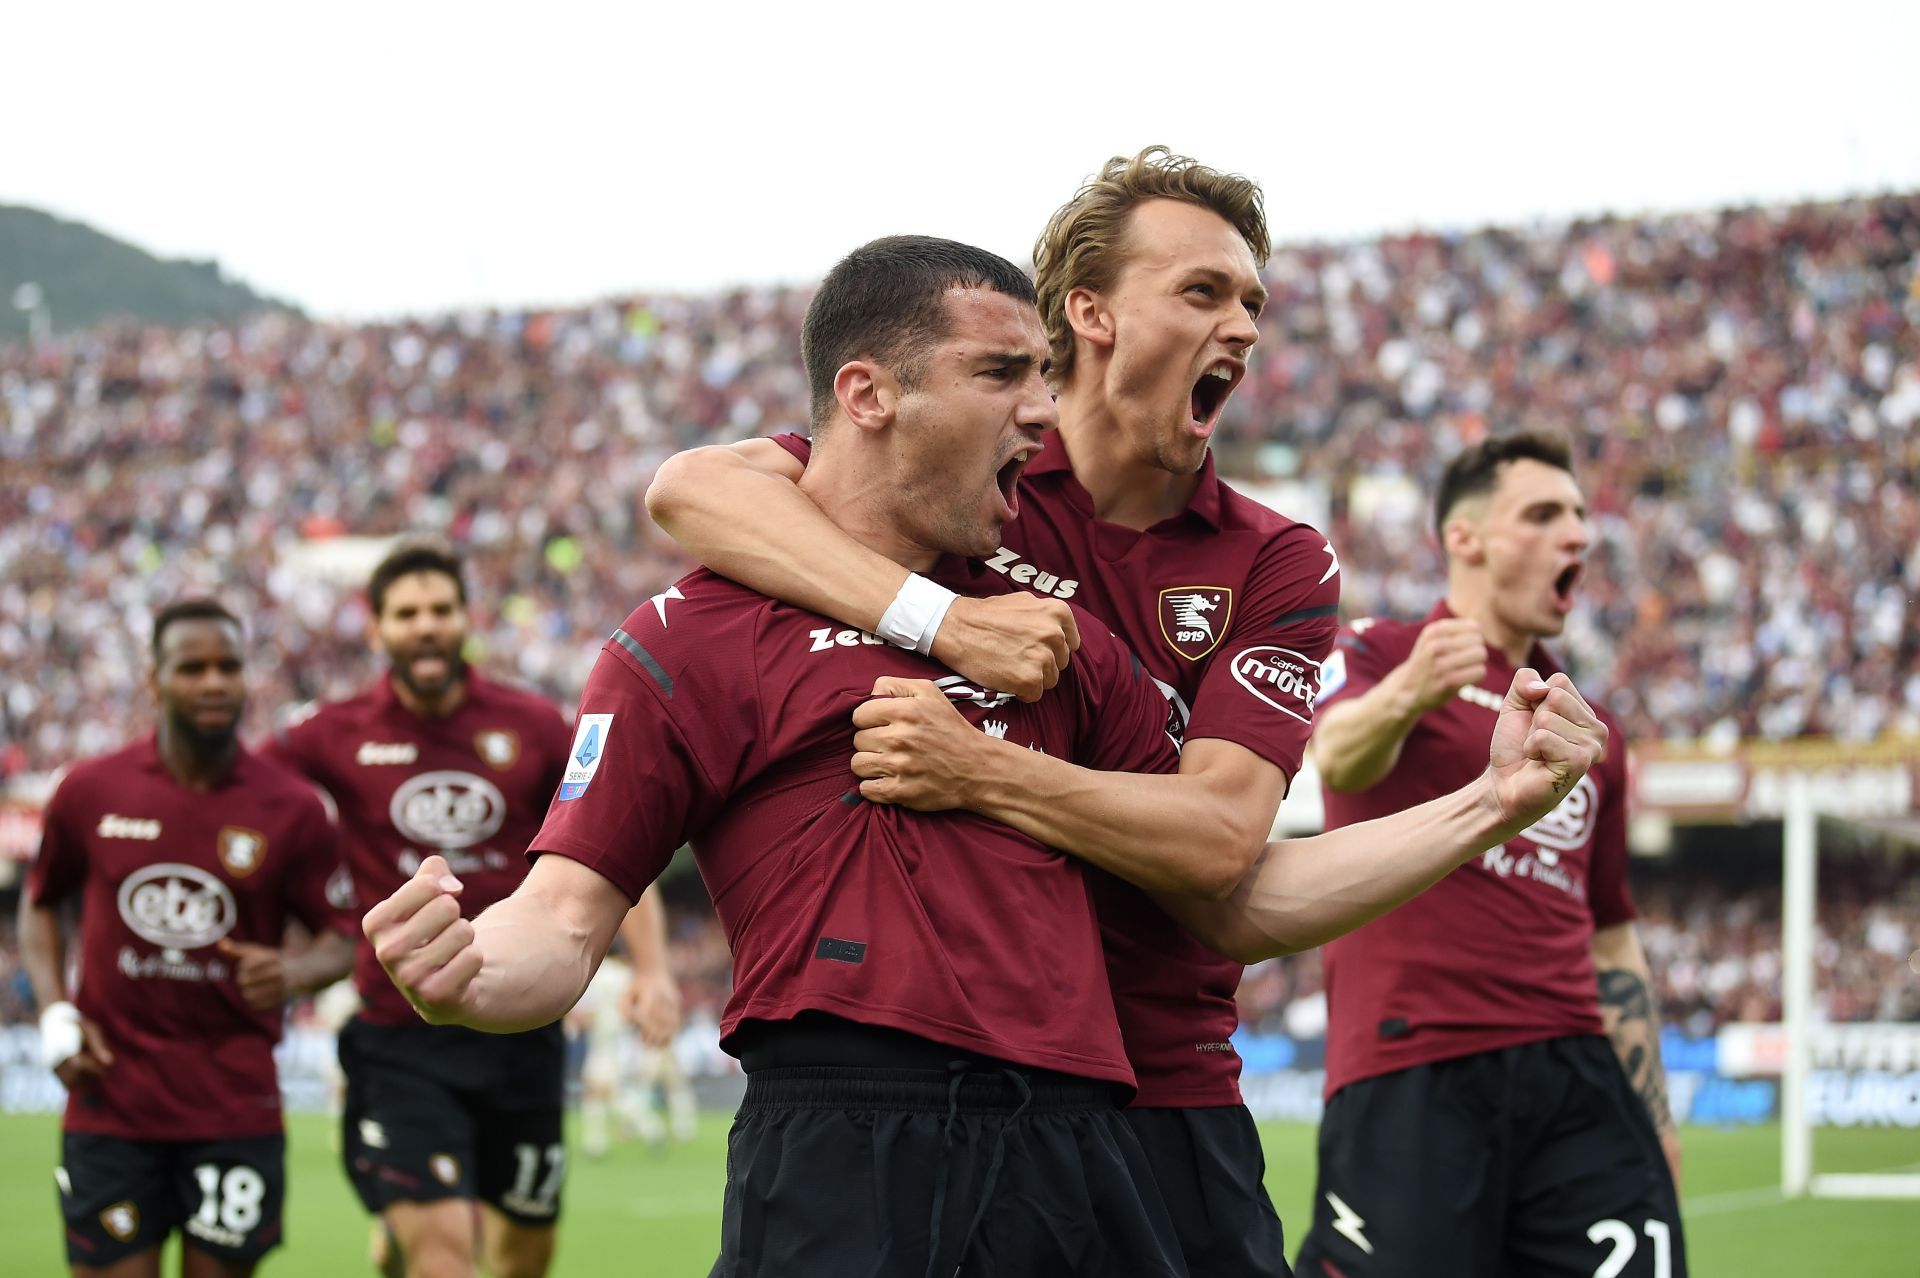 Salernitana will be looking to win the game and ensure their survival